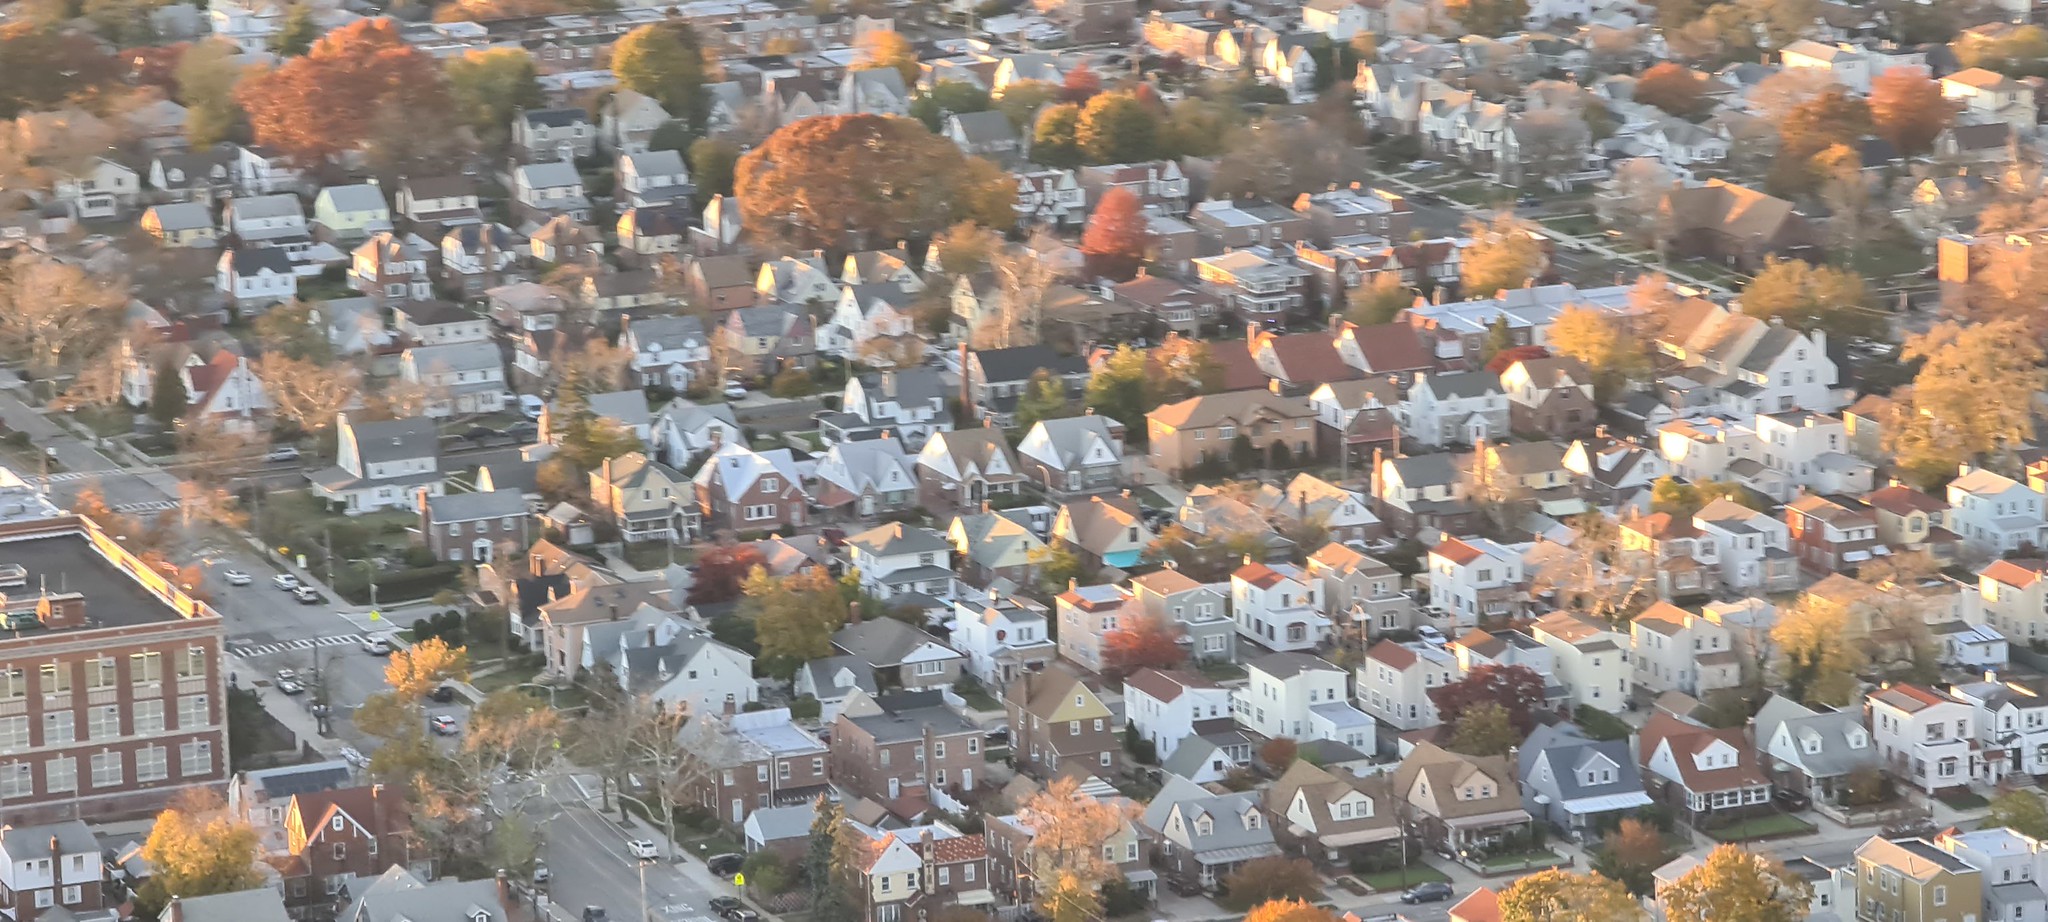 The view of the houses on final approach into New York JFK